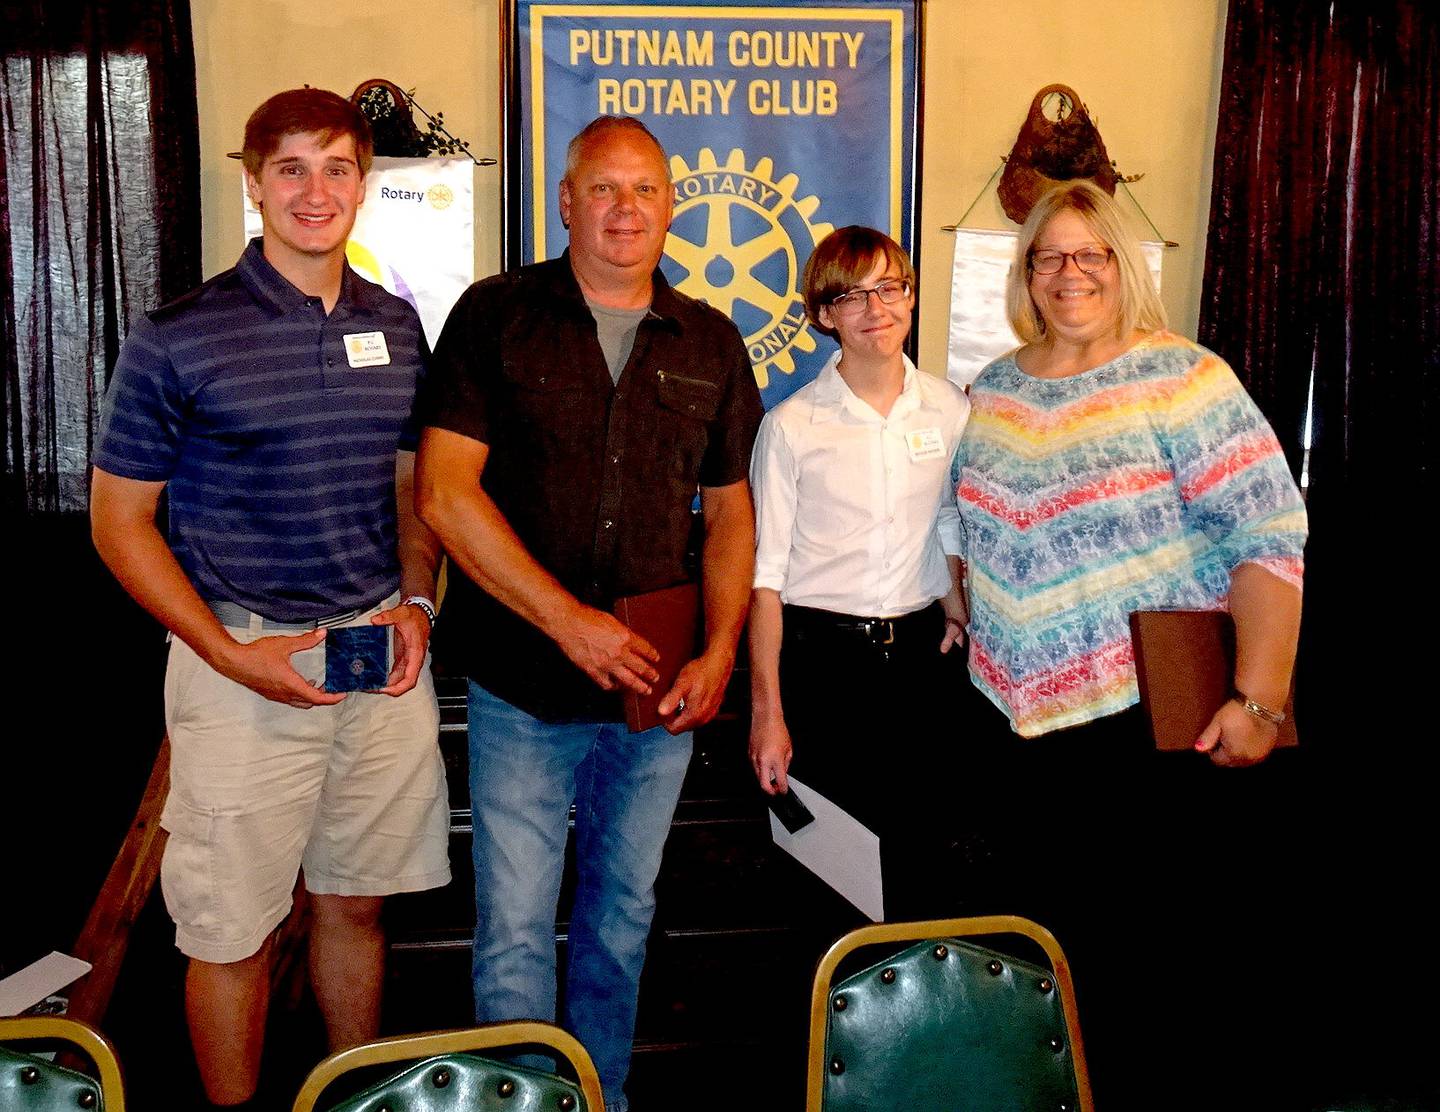 Several members of the community were also recognized for their “Service Above Self” in recognition of Rotary’s motto. Those include Anton Dzierzynski, Bryson Brown, Nicholas Currie and Helen Lenkaitis.